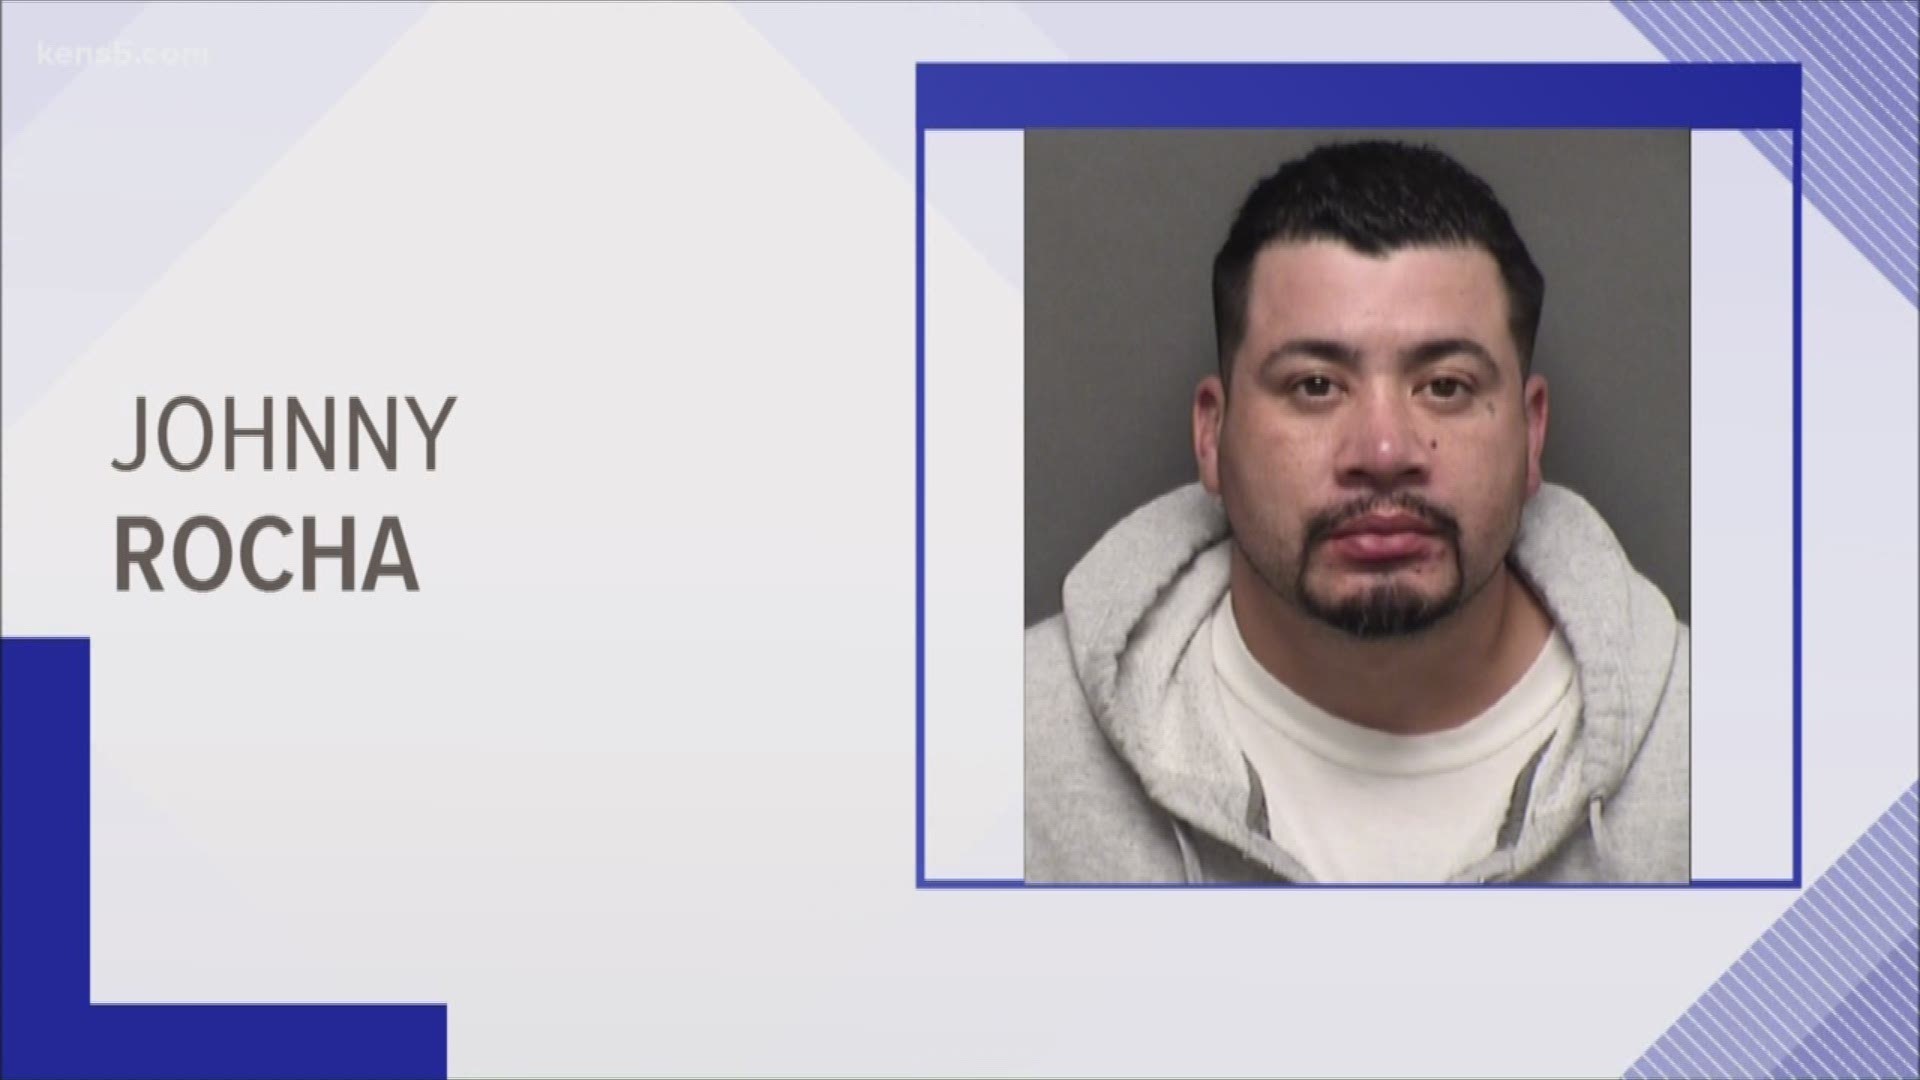 Johnny Rocha was released in June after being granted probation while being charged with assault on a family member. Now KENS 5 has learned he was supposed to be held and later sent to Lubbock County.